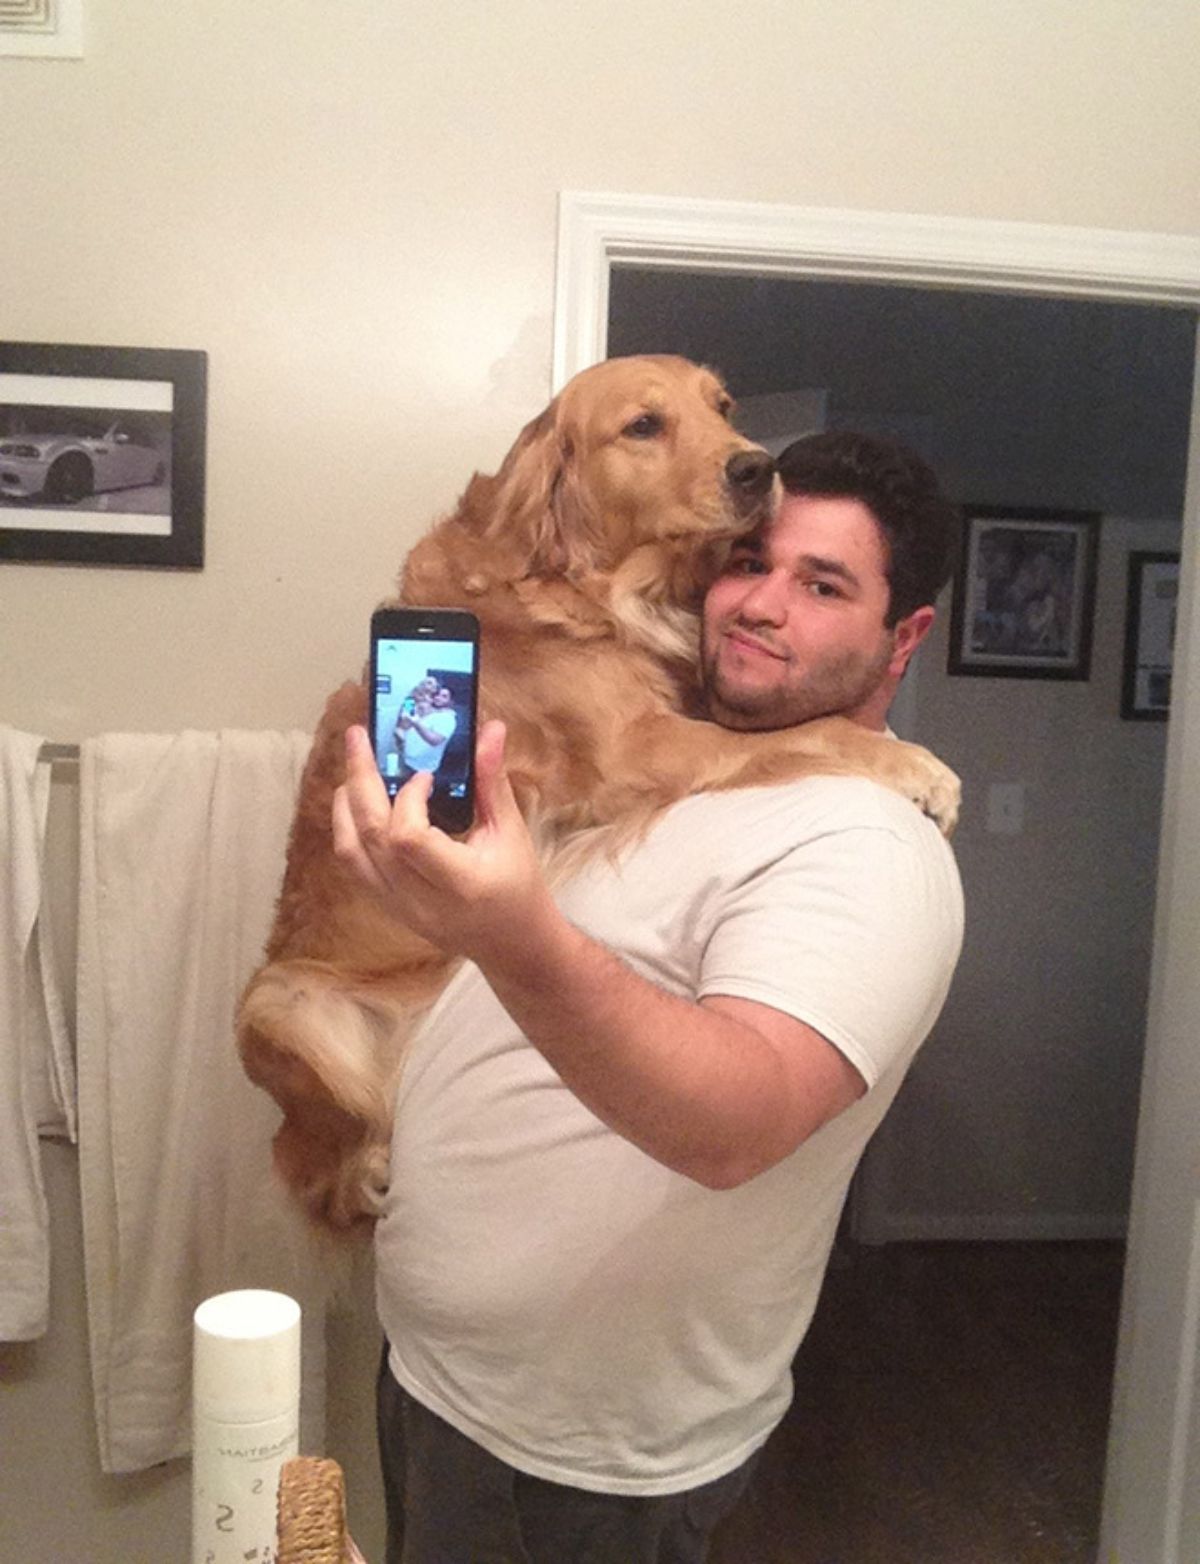 golden retriever being carried by a man and he's taking a selfie of the two of them in the mirror